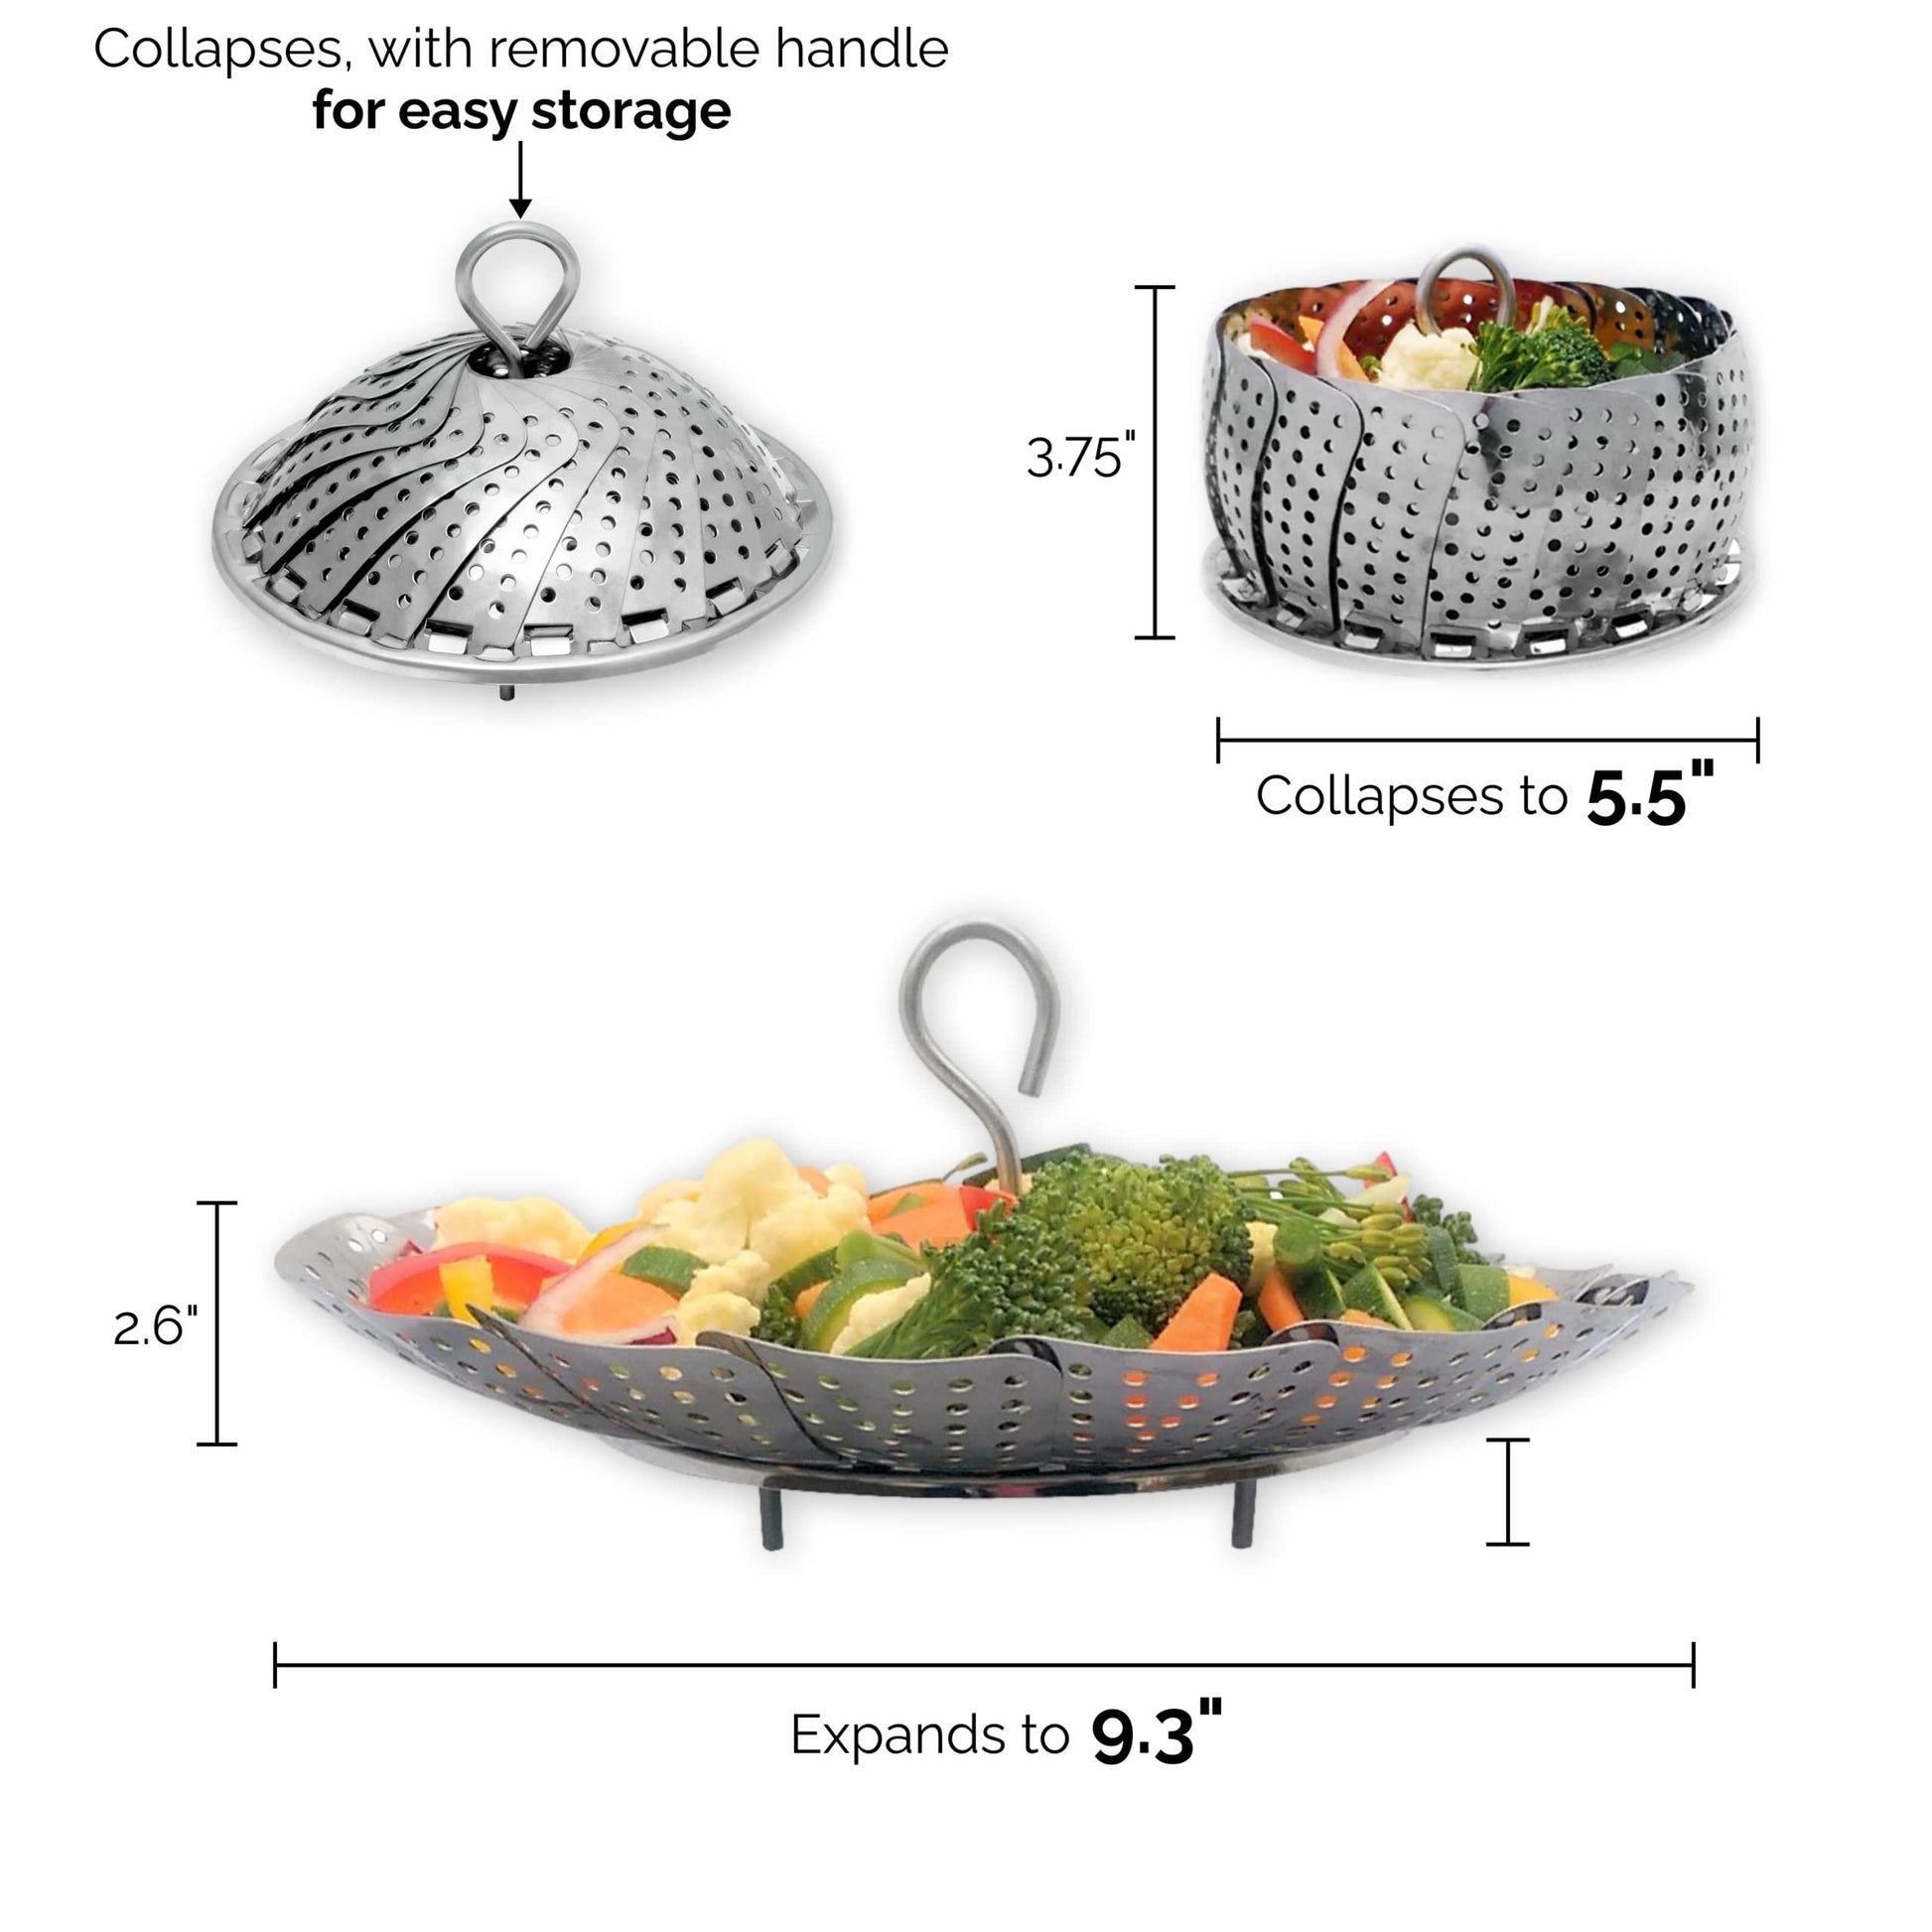 Kitchen Deluxe Vegetable Steamer Basket - Fits Instant Pot Pressure Cooker 3, 5, 6 Qt & 8 Quart - 100% Stainless Steel - Accessories Include Safety Tool + Julienne Peeler + eBook - For Instapot - CookCave